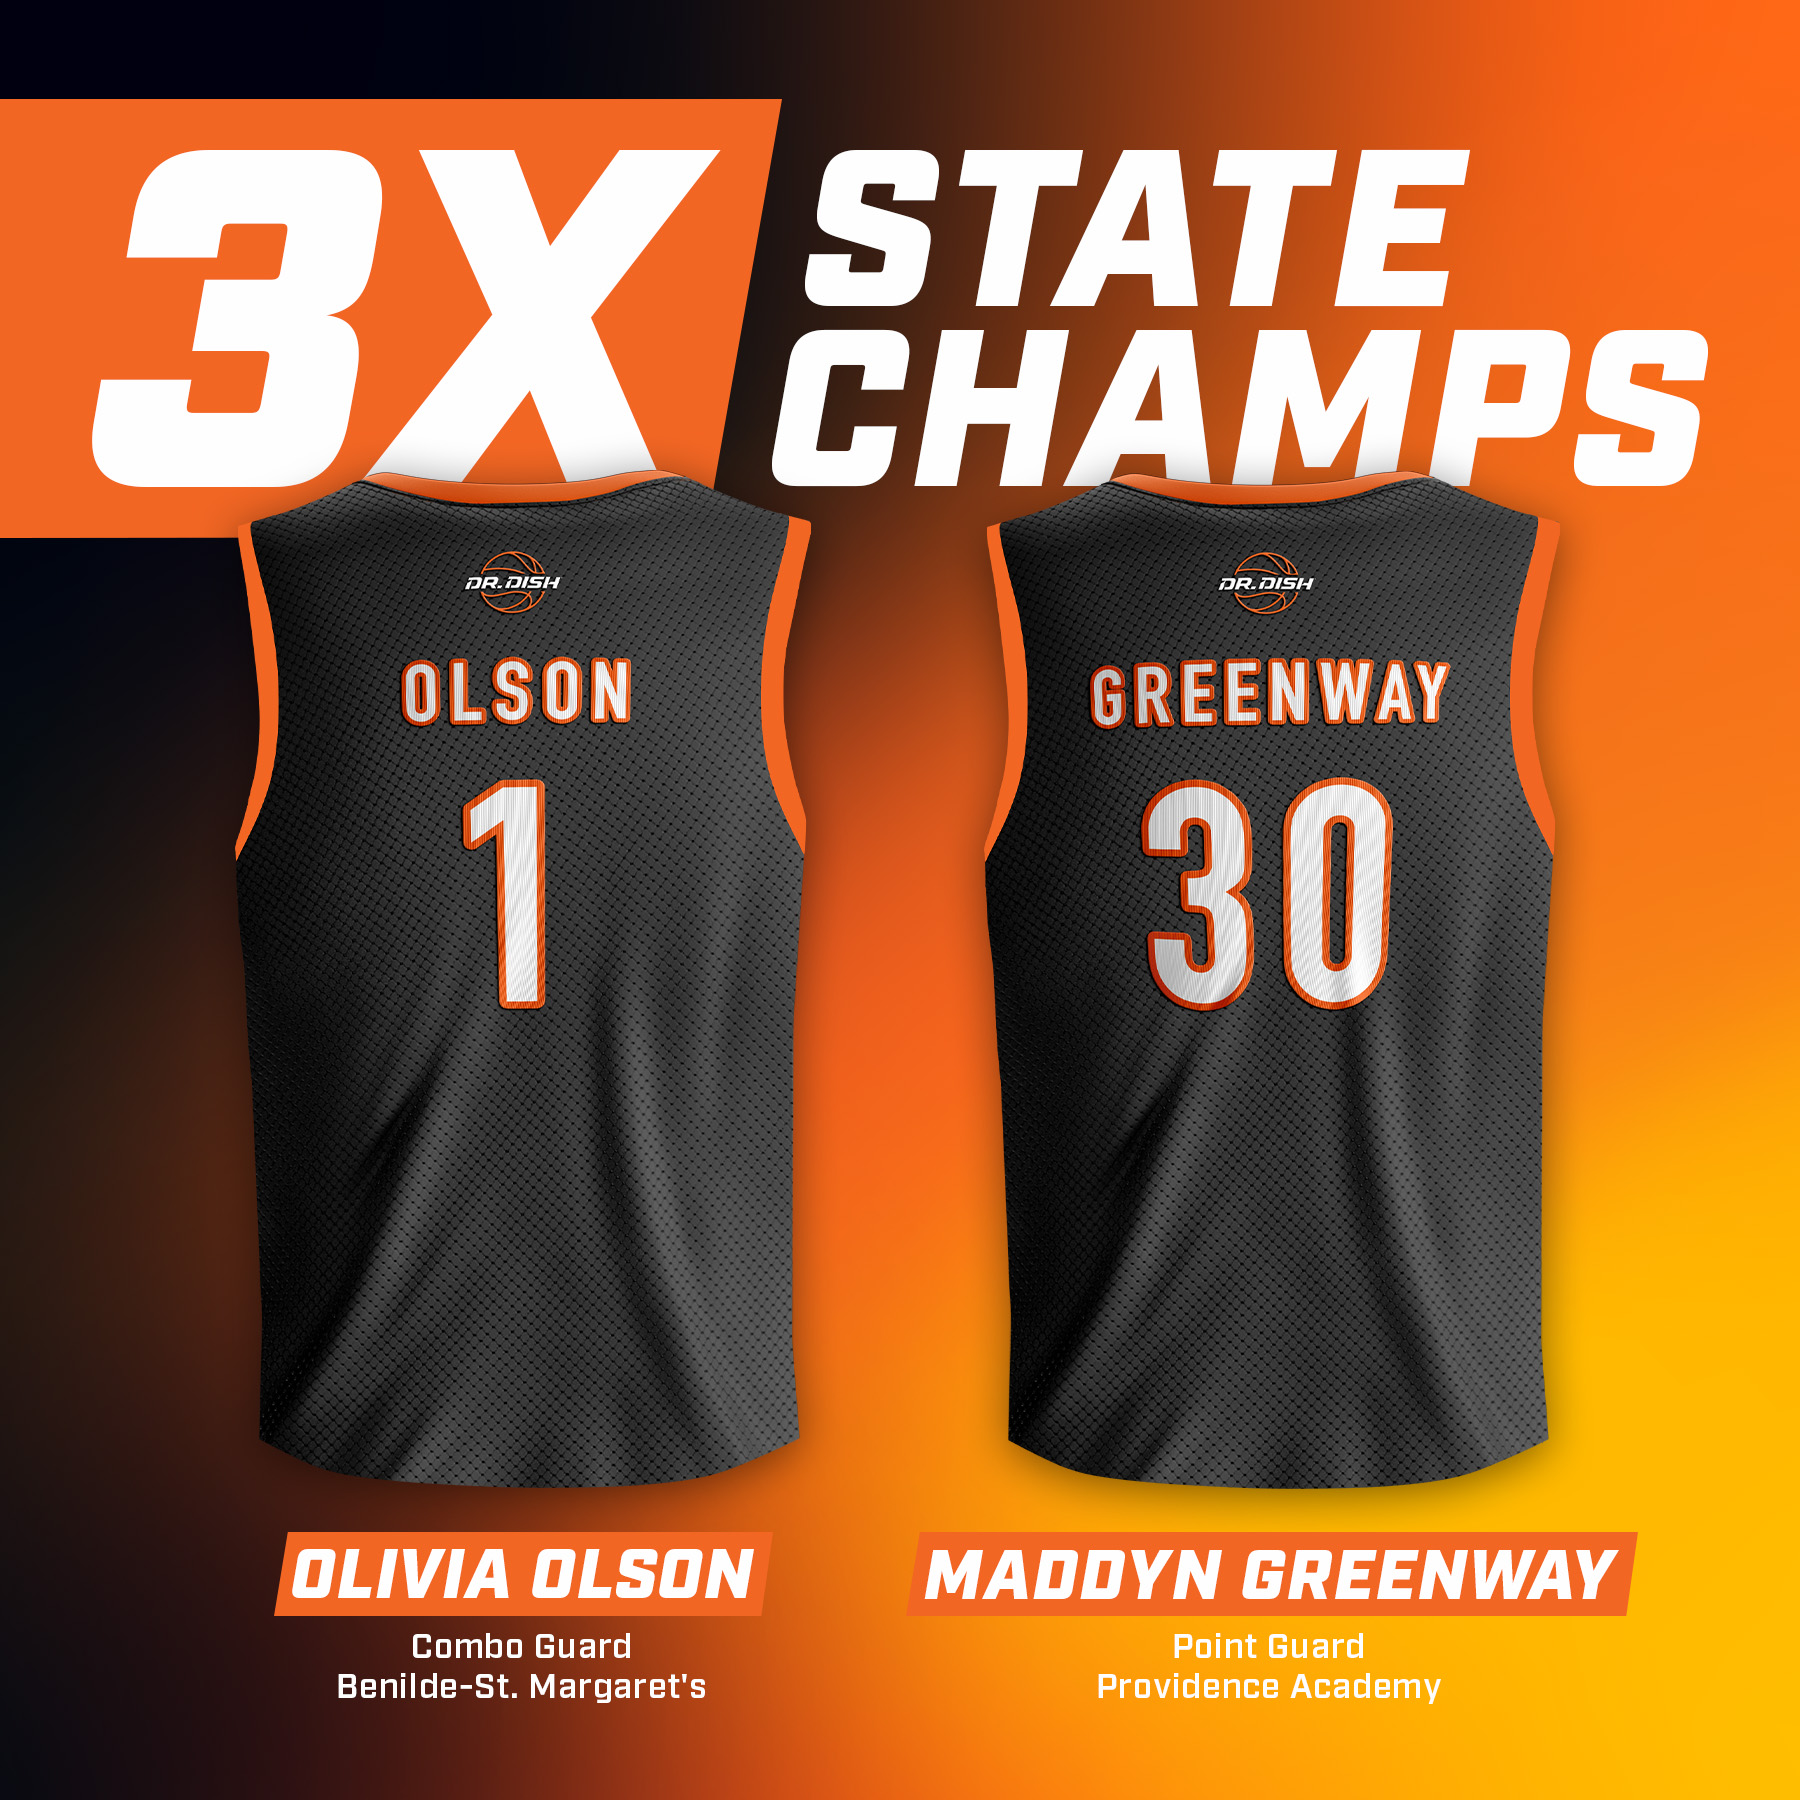 Congratulations to 3X MN State Champions Olivia Olson and Maddyn Greenway